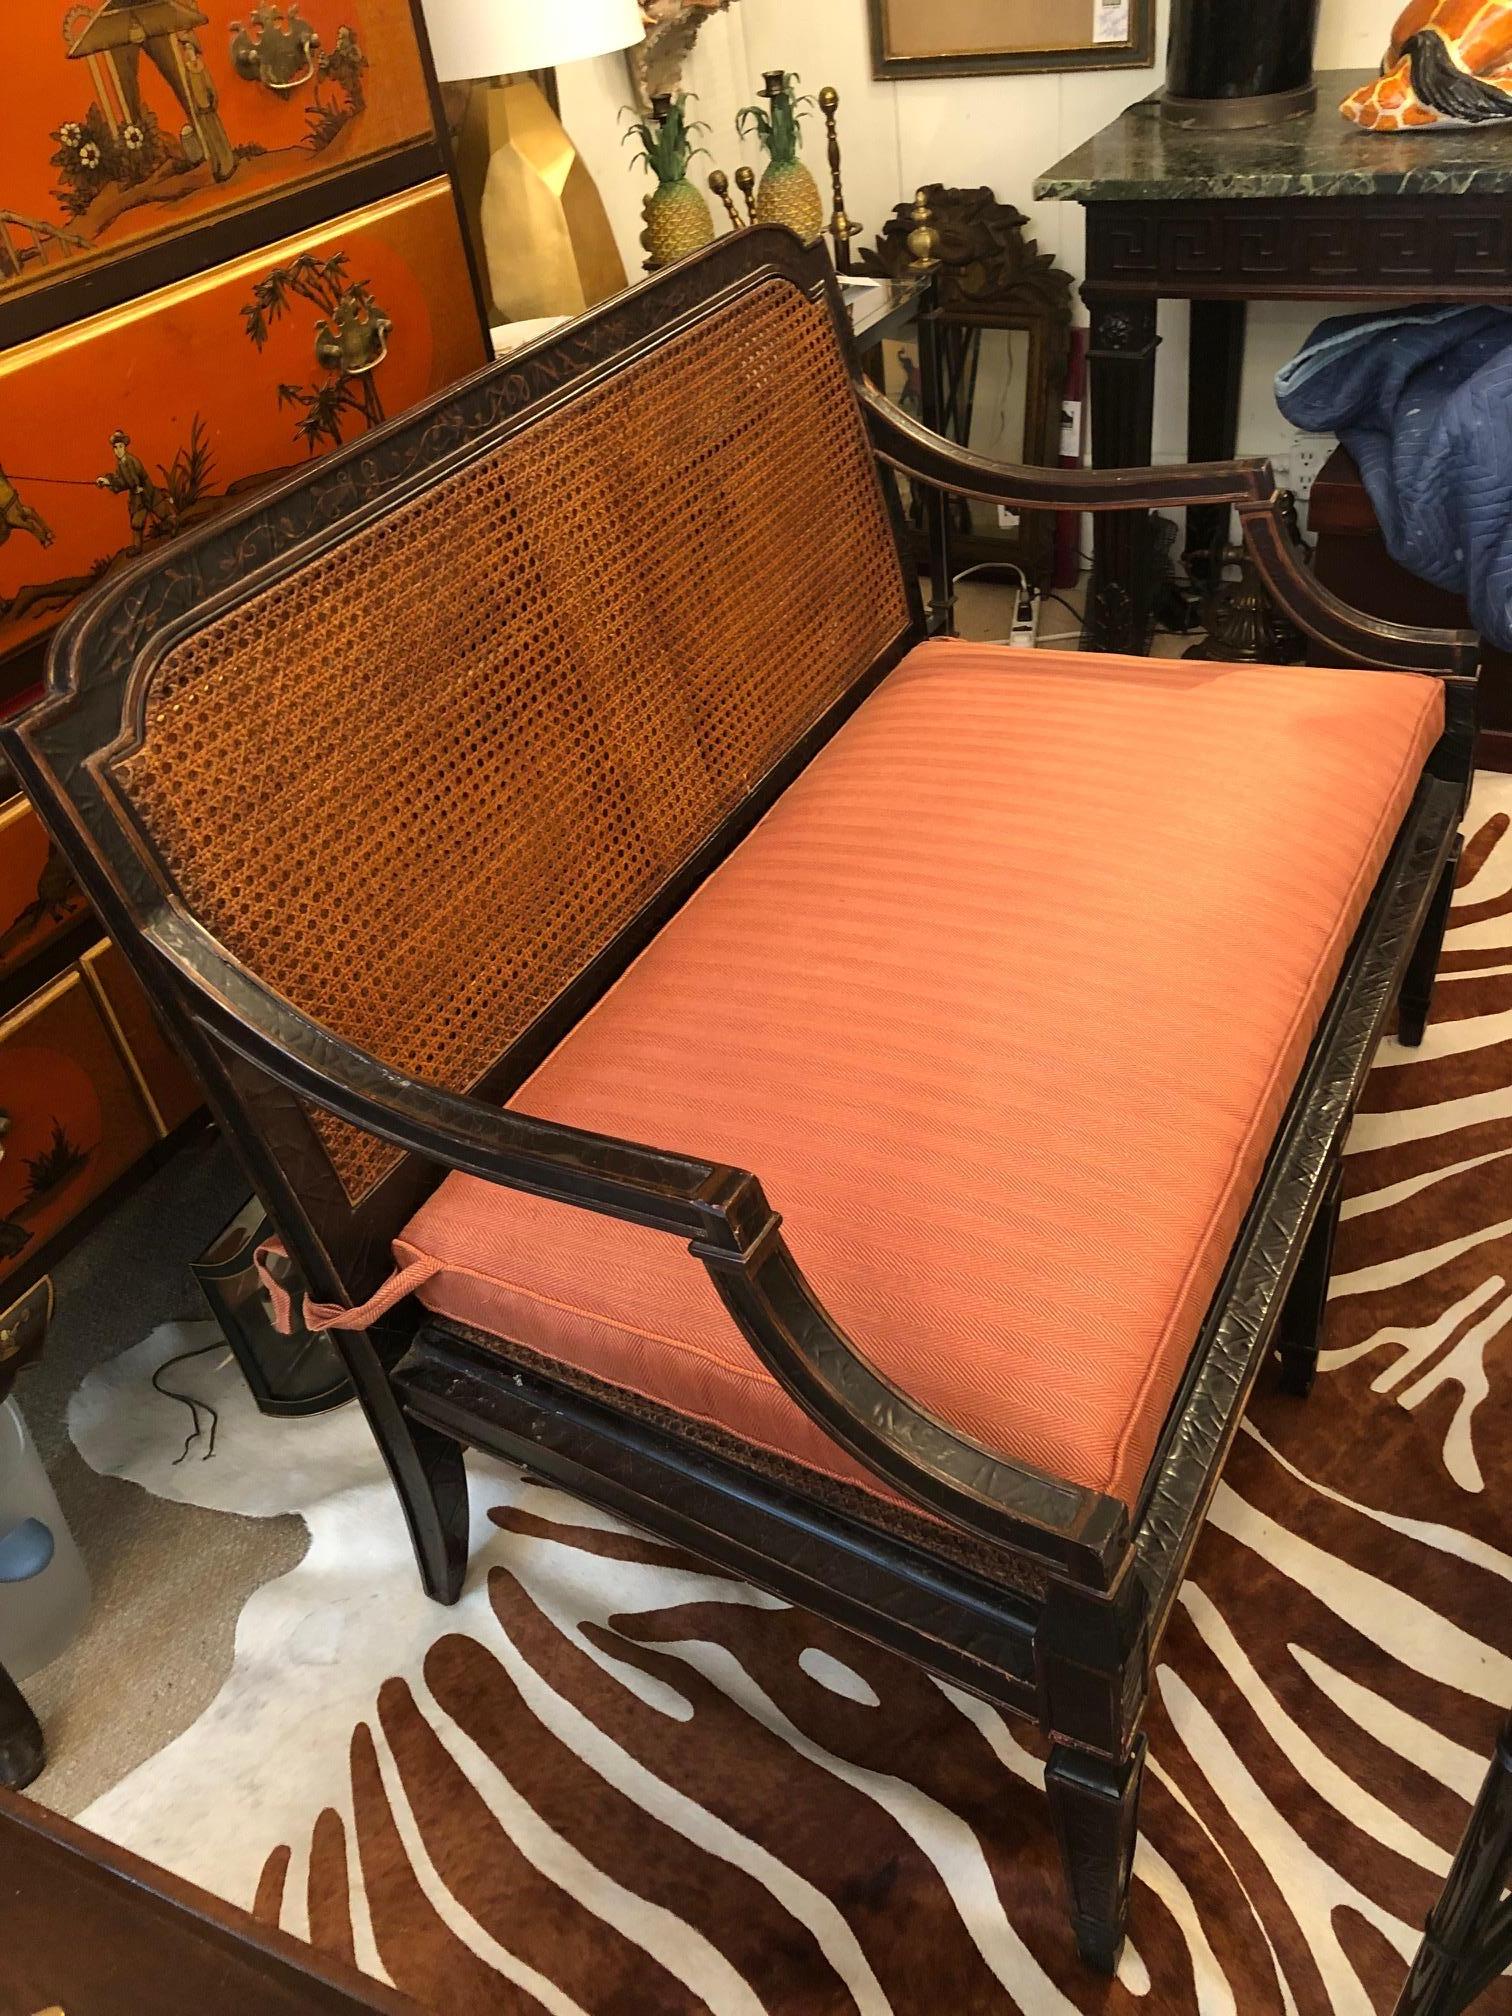 Handsome chinoiserie style hand painted black and muted warm bronzey gold loveseat having stunning caned seat and double caned back. A separate custom cushion is included.
arm height 25.75
seat height without cushion 14.25
top width of loveseat